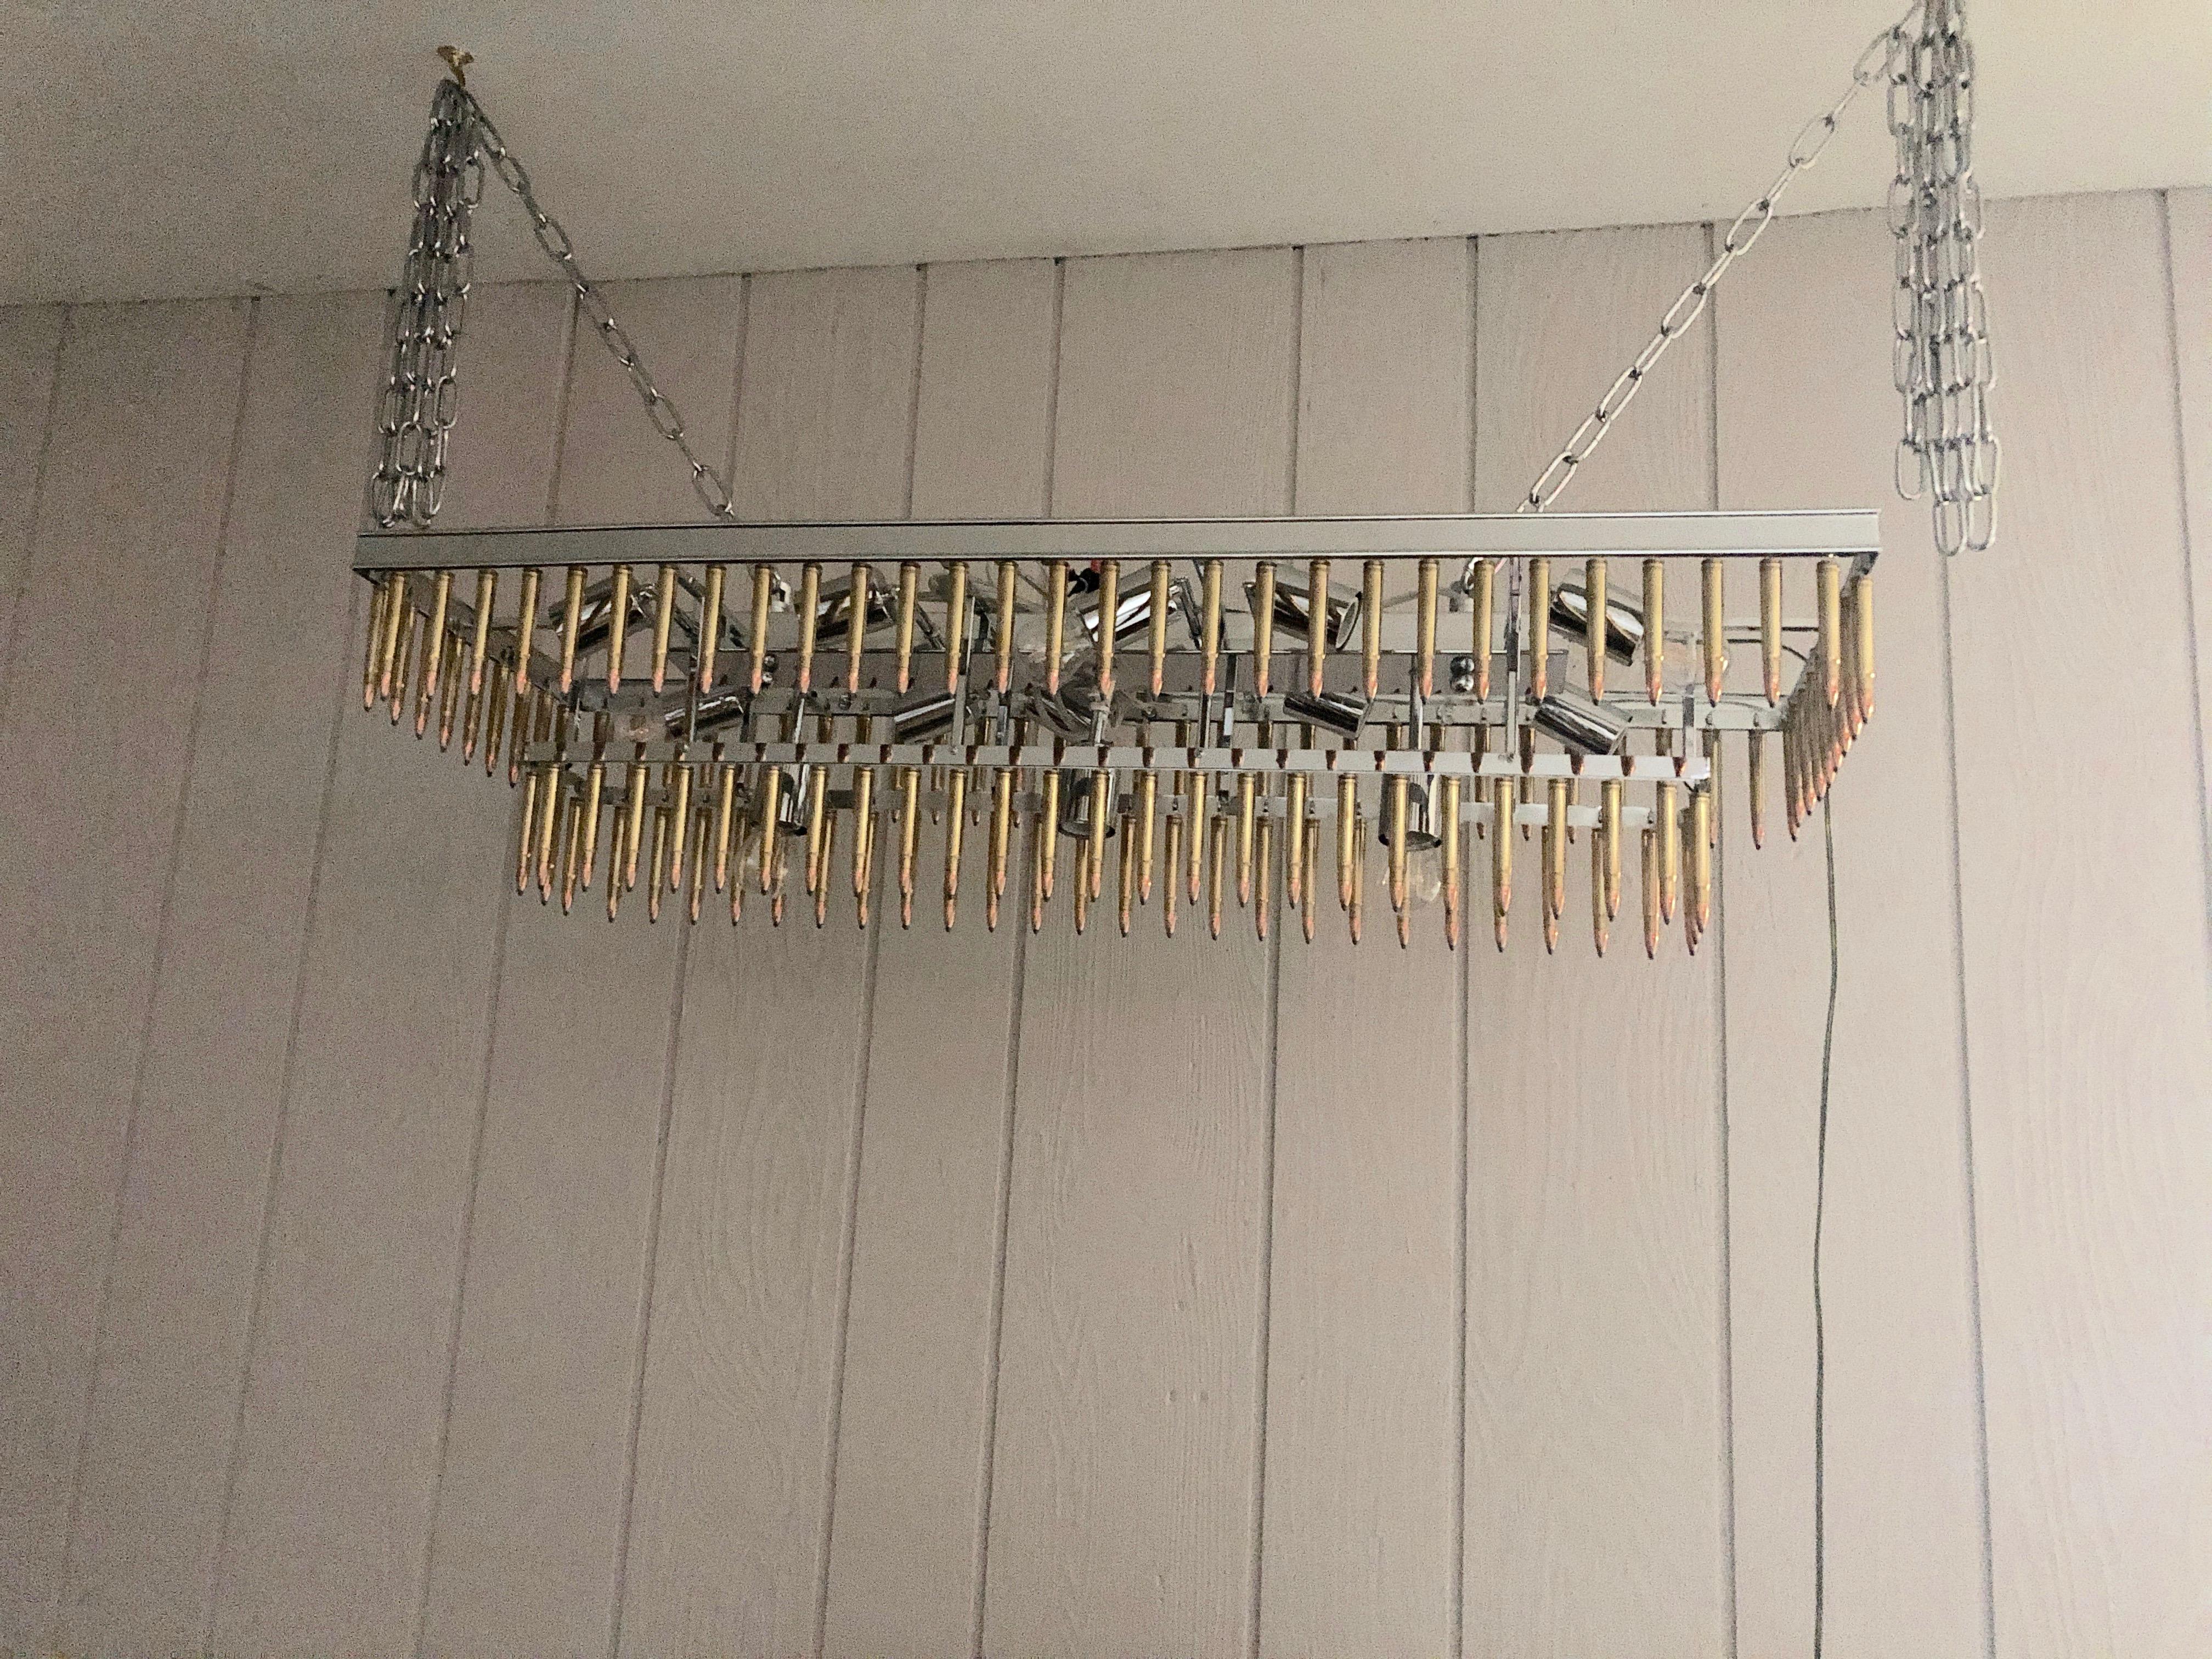 Local Princeton artisan handcrafts one of a kind chandeliers from old salvaged light fixtures which are transformed to contemporary pieces adorned with copper bullets. This is a large rectangular two tier creation with 8 sockets.